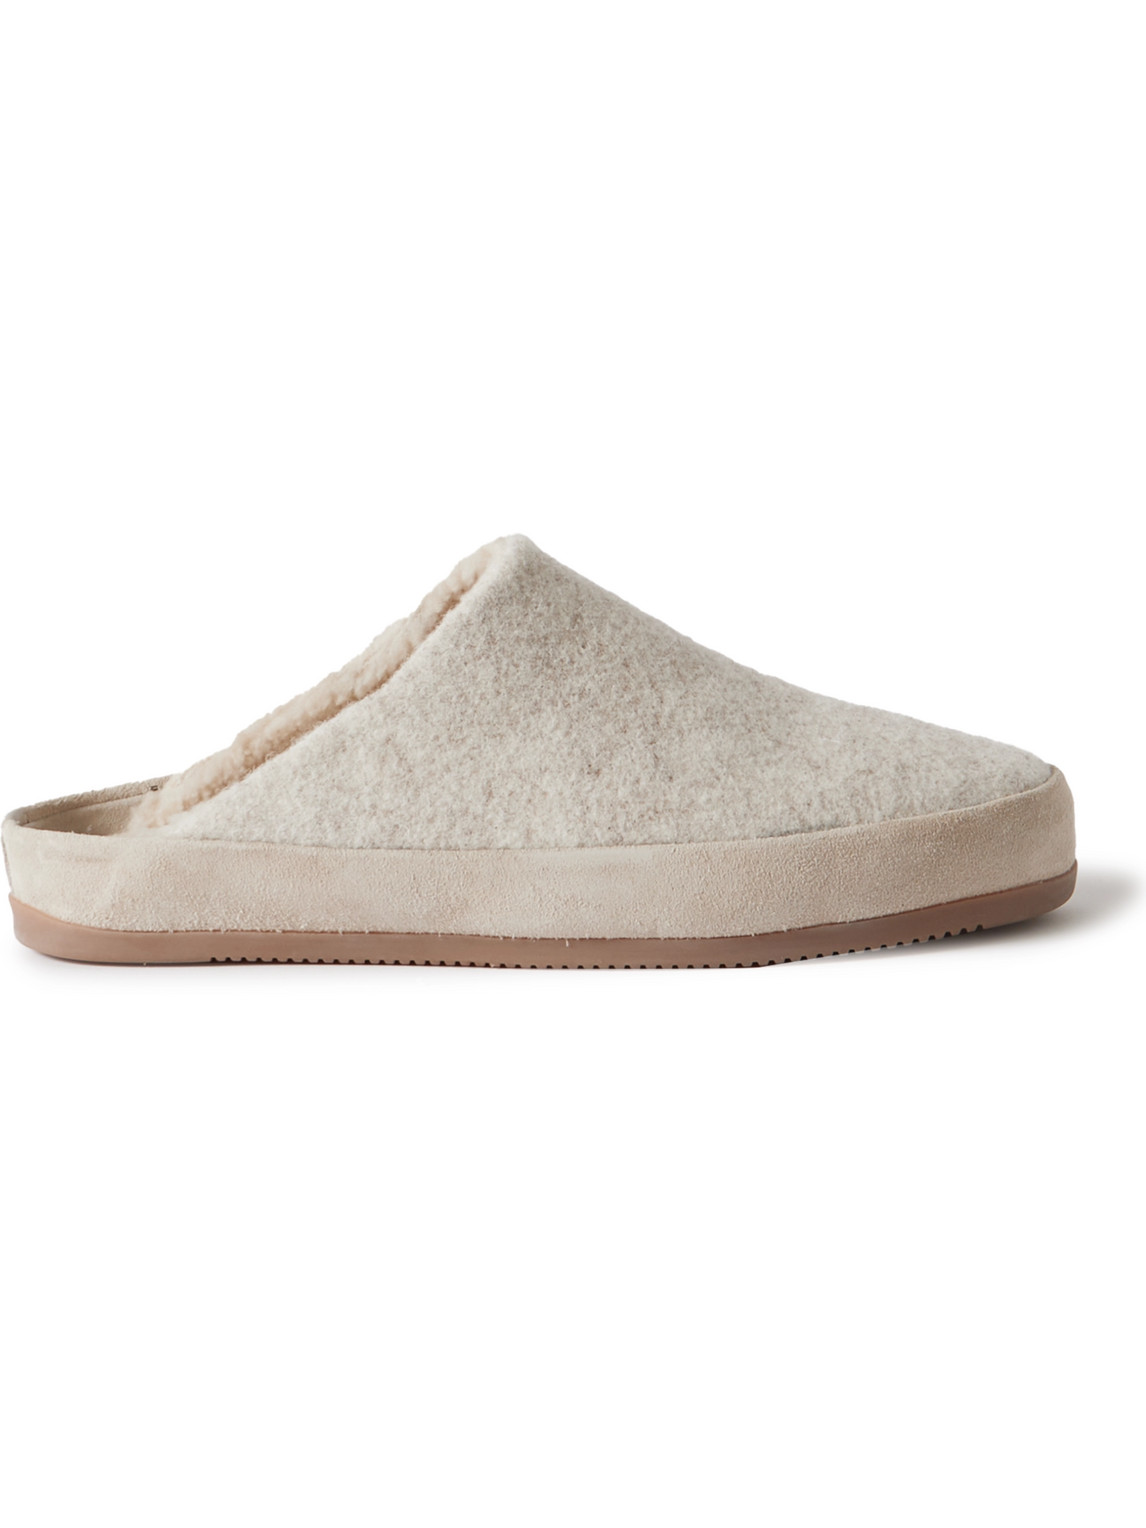 Suede-Trimmed Shearling-Lined Recycled-Wool Slippers